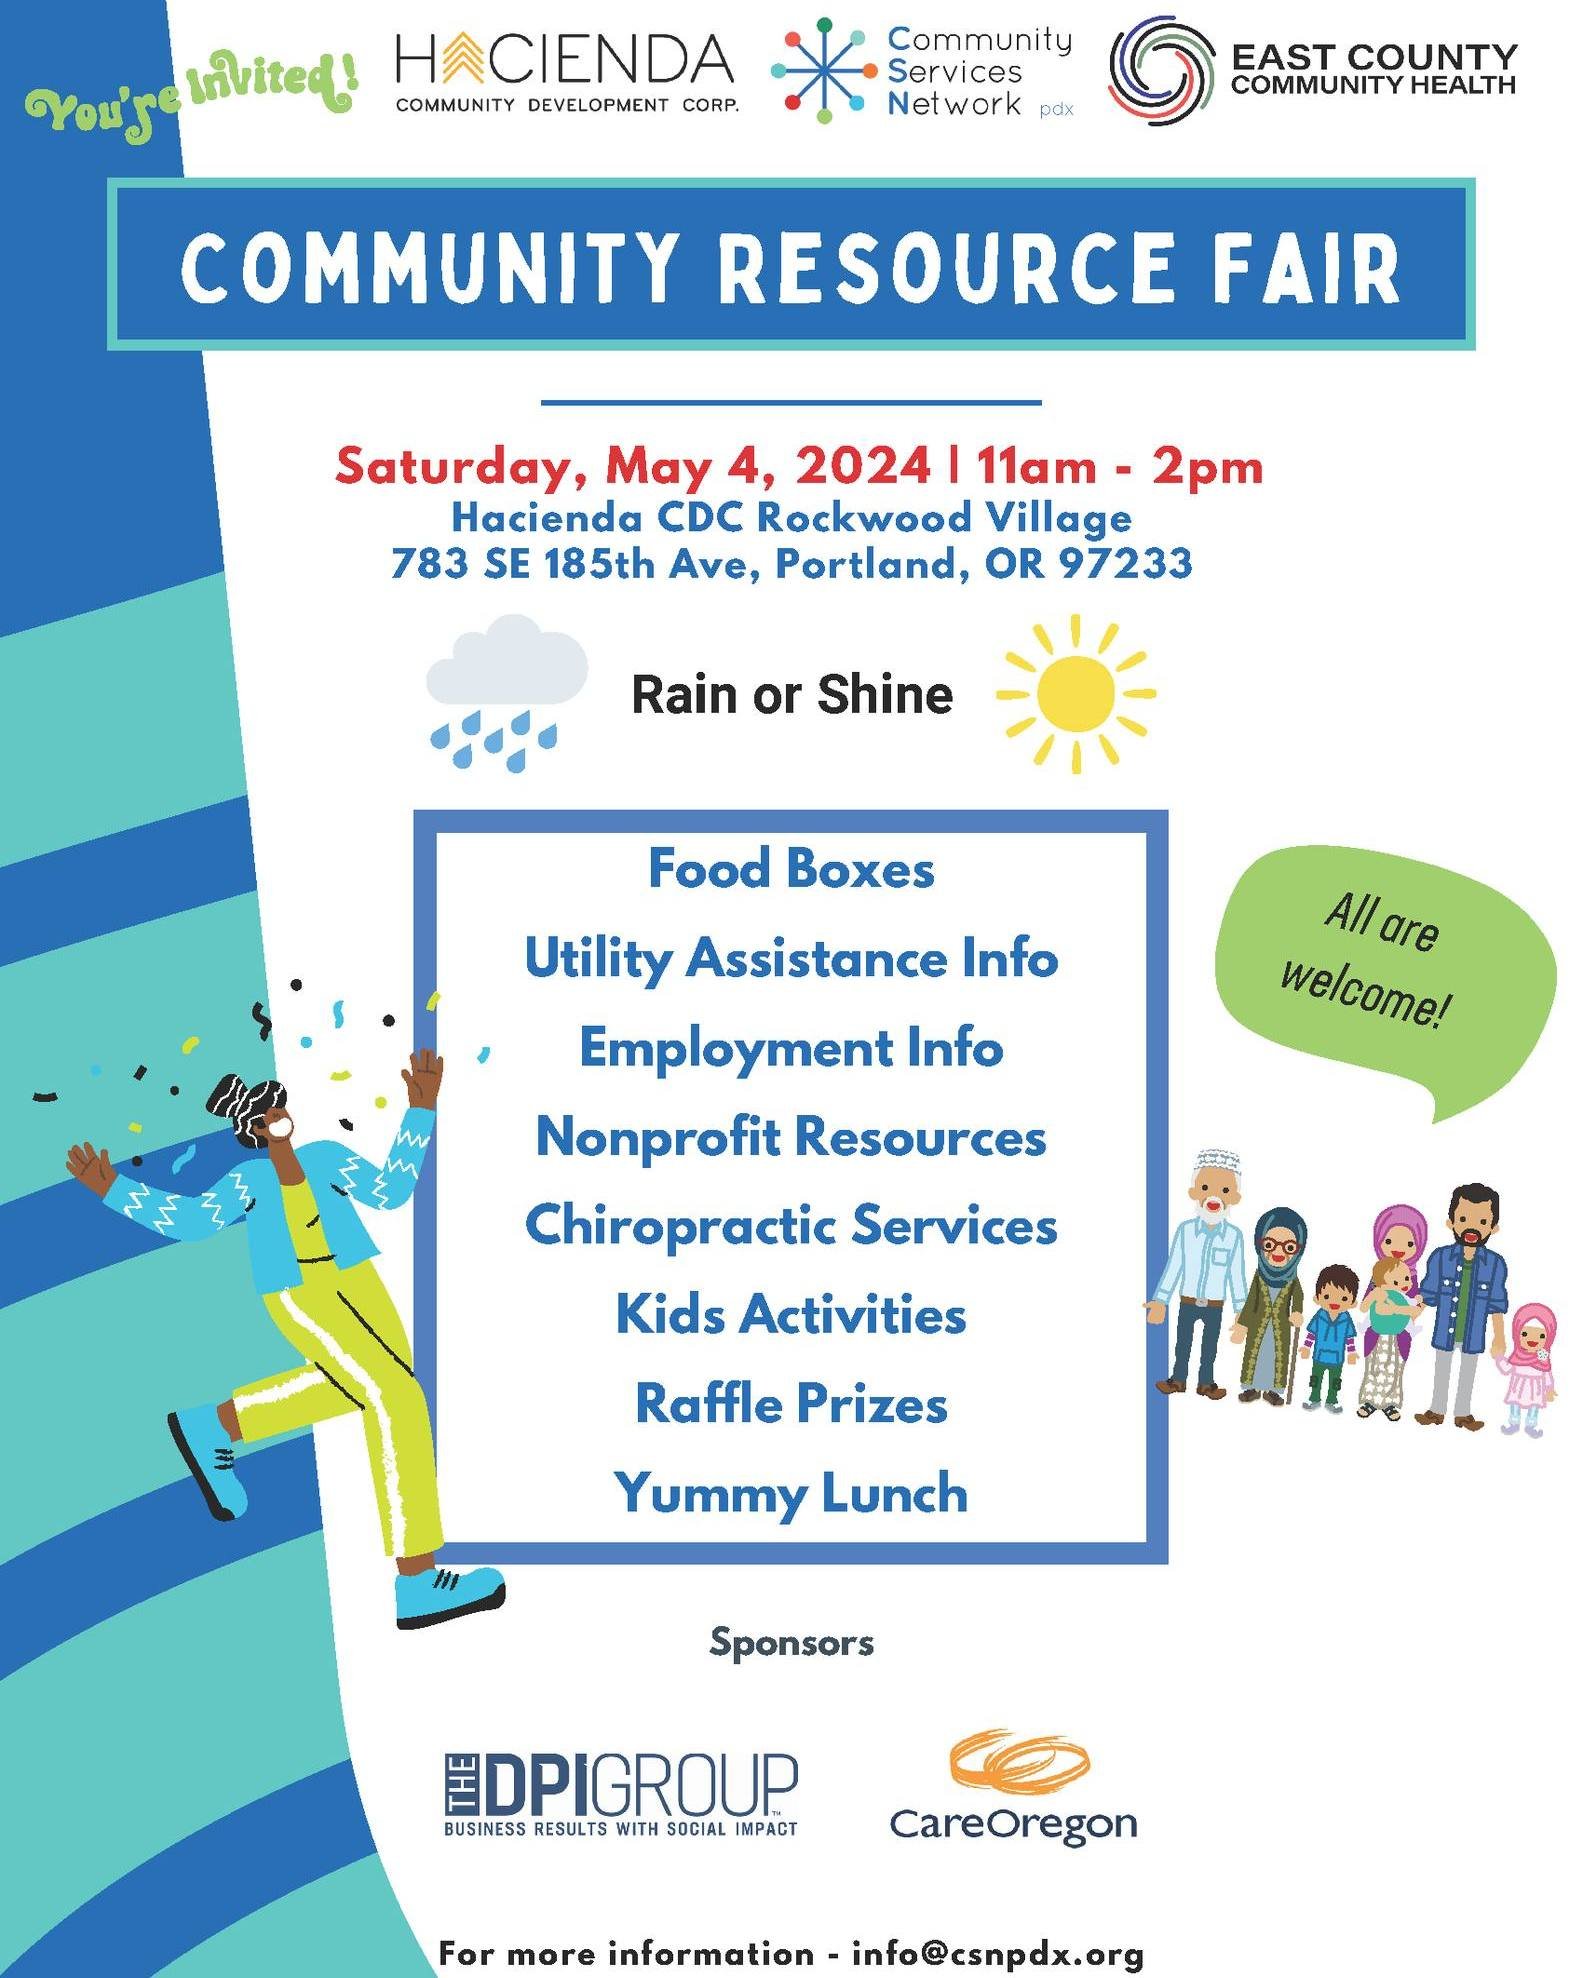 Join us for a day of connections, support, and good times at the Community and Youth Resource Fair. This is a fantastic opportunity to connect with valuable resources, enjoy some delicious food, and engage in fun activities. Whether you're coming to 